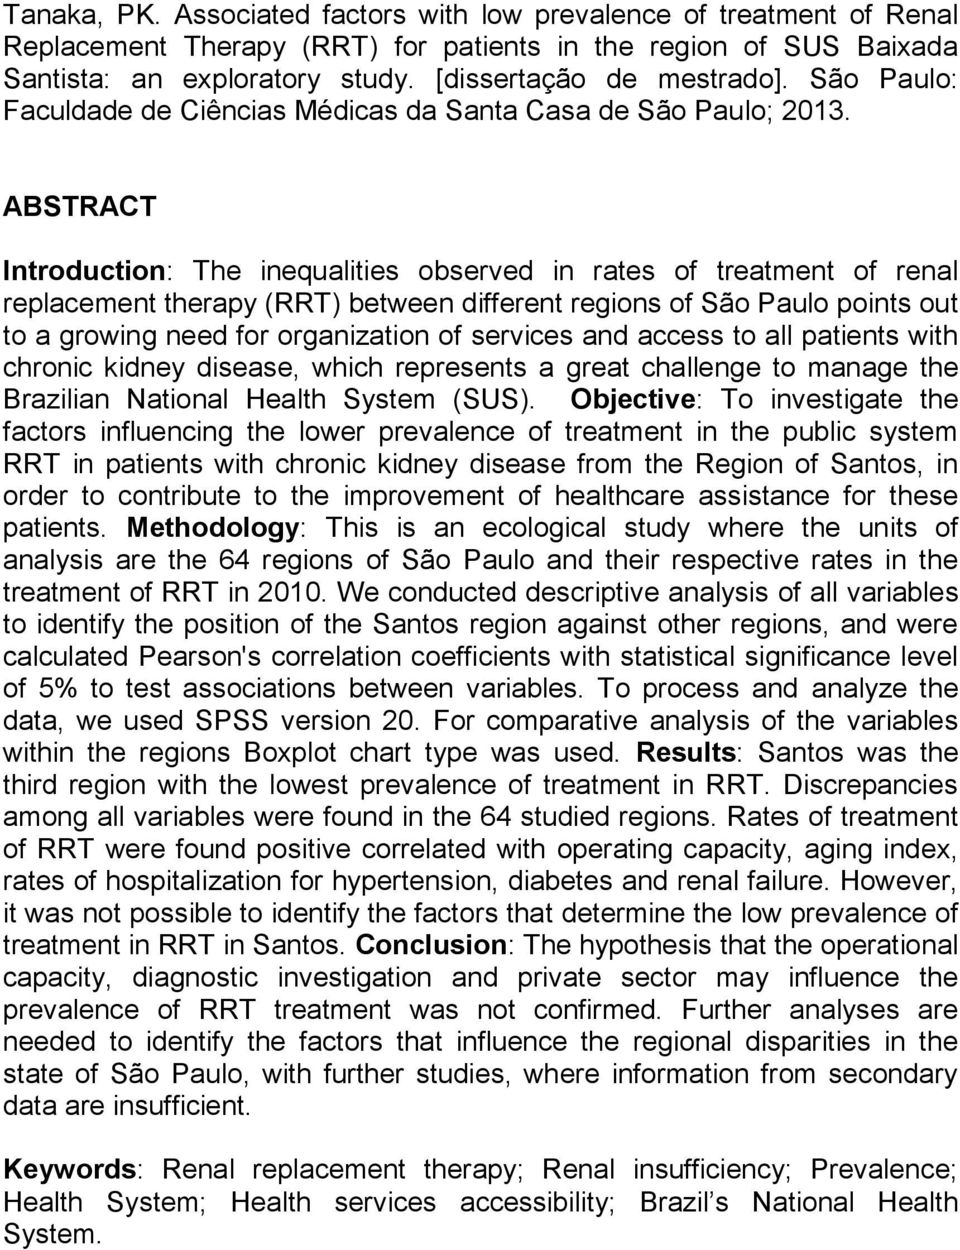 ABSTRACT Introduction: The inequalities observed in rates of treatment of renal replacement therapy (RRT) between different regions of São Paulo points out to a growing need for organization of